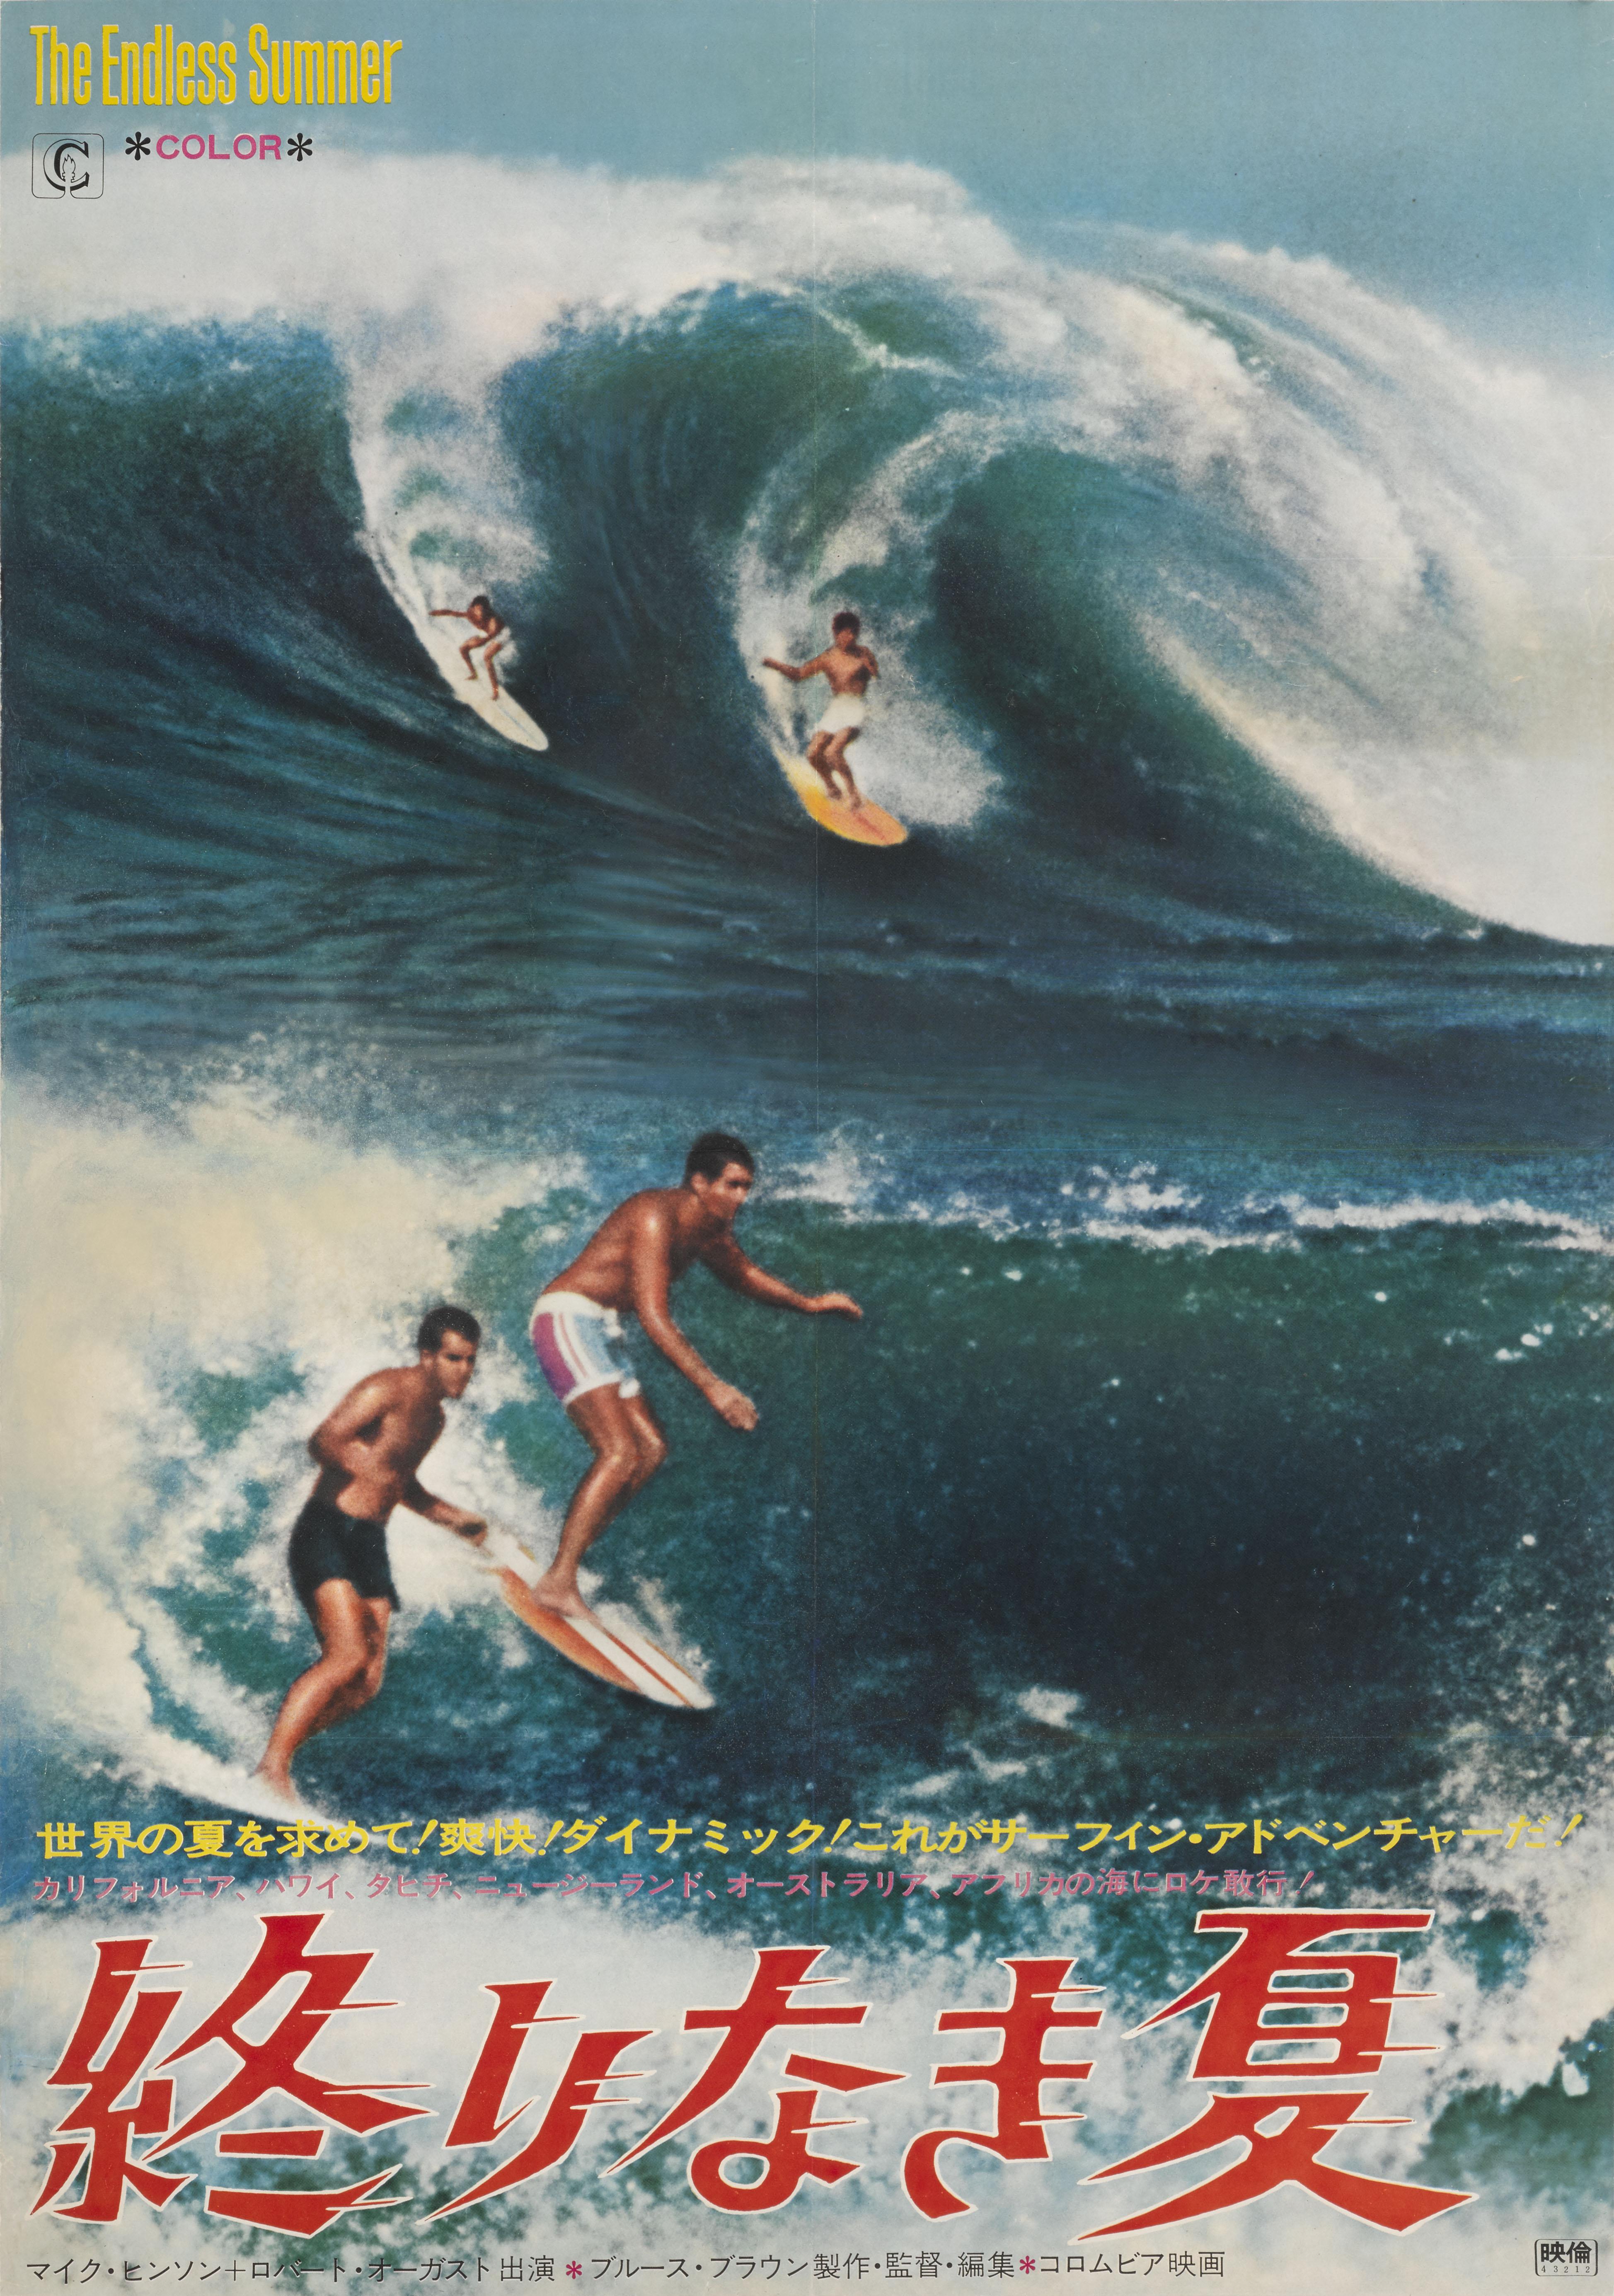 Original Japanese film poster  for Bruce Brown's cult 1966 surfing documentary. This very cool artwork was only used on this Japanese poster.
This poster is conservation linen backed and it would be shipped rolled in a very strong tube and sent by